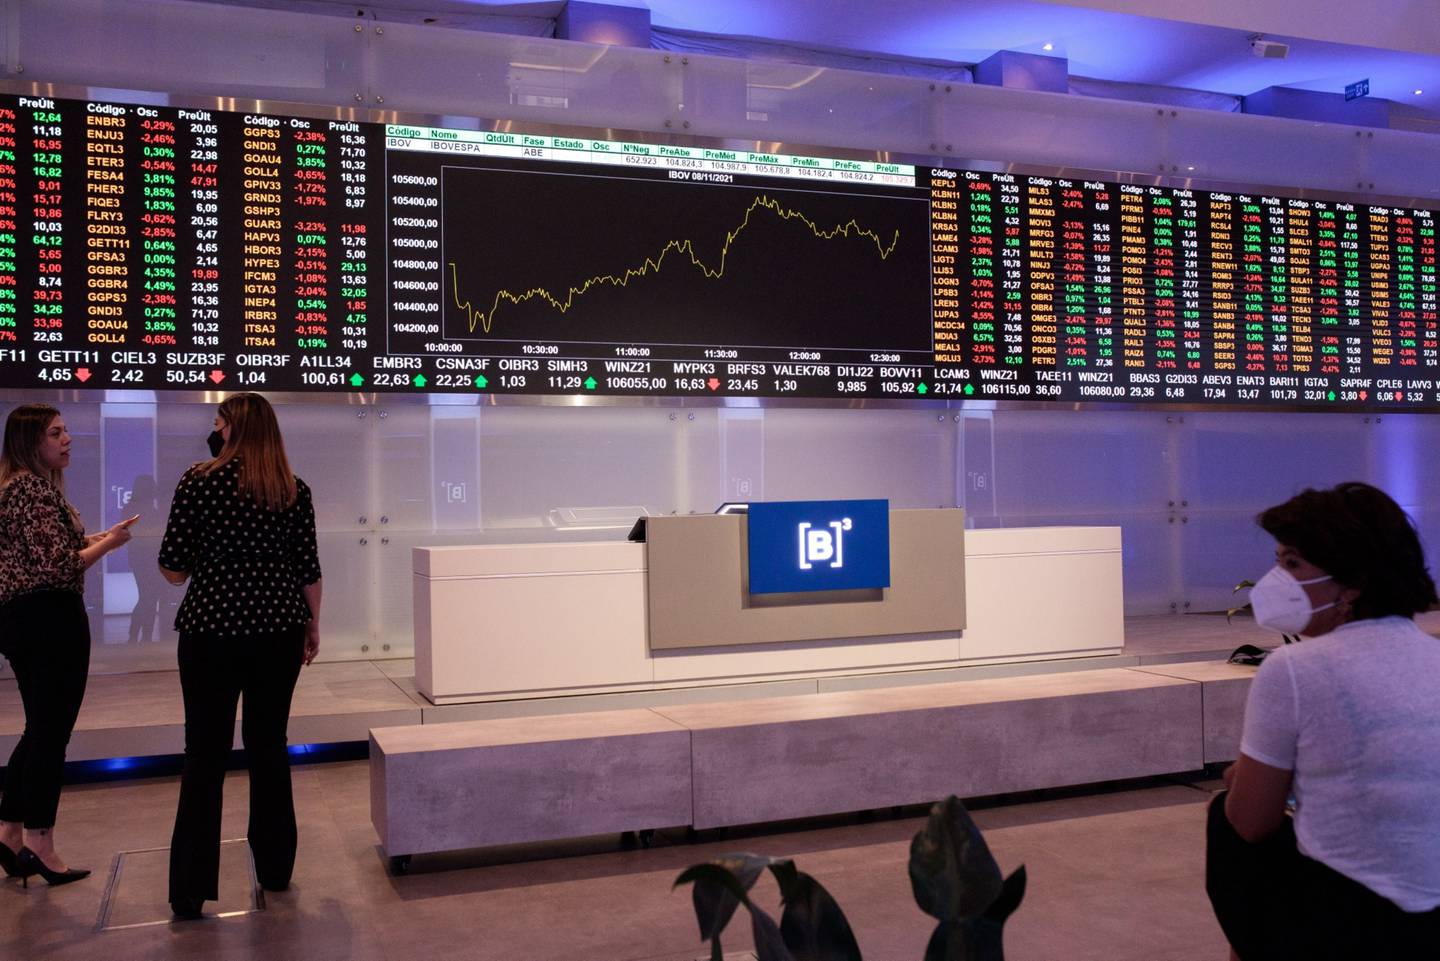 Visitors in front of an electronic board displaying stock activity at the Brasil Bolsa Balcao (B3) stock exchange in Sao Paulo, Brazil, on Monday, Nov. 8, 2021. The Ibovespa opened 0.2 percent lower at 104,627.30 in Sao Paulo, with Brasil Bolsa Balcao contributing the most to the index decline, decreasing 1.9 percent. Photographer: Patricia Monteiro/Bloomberg